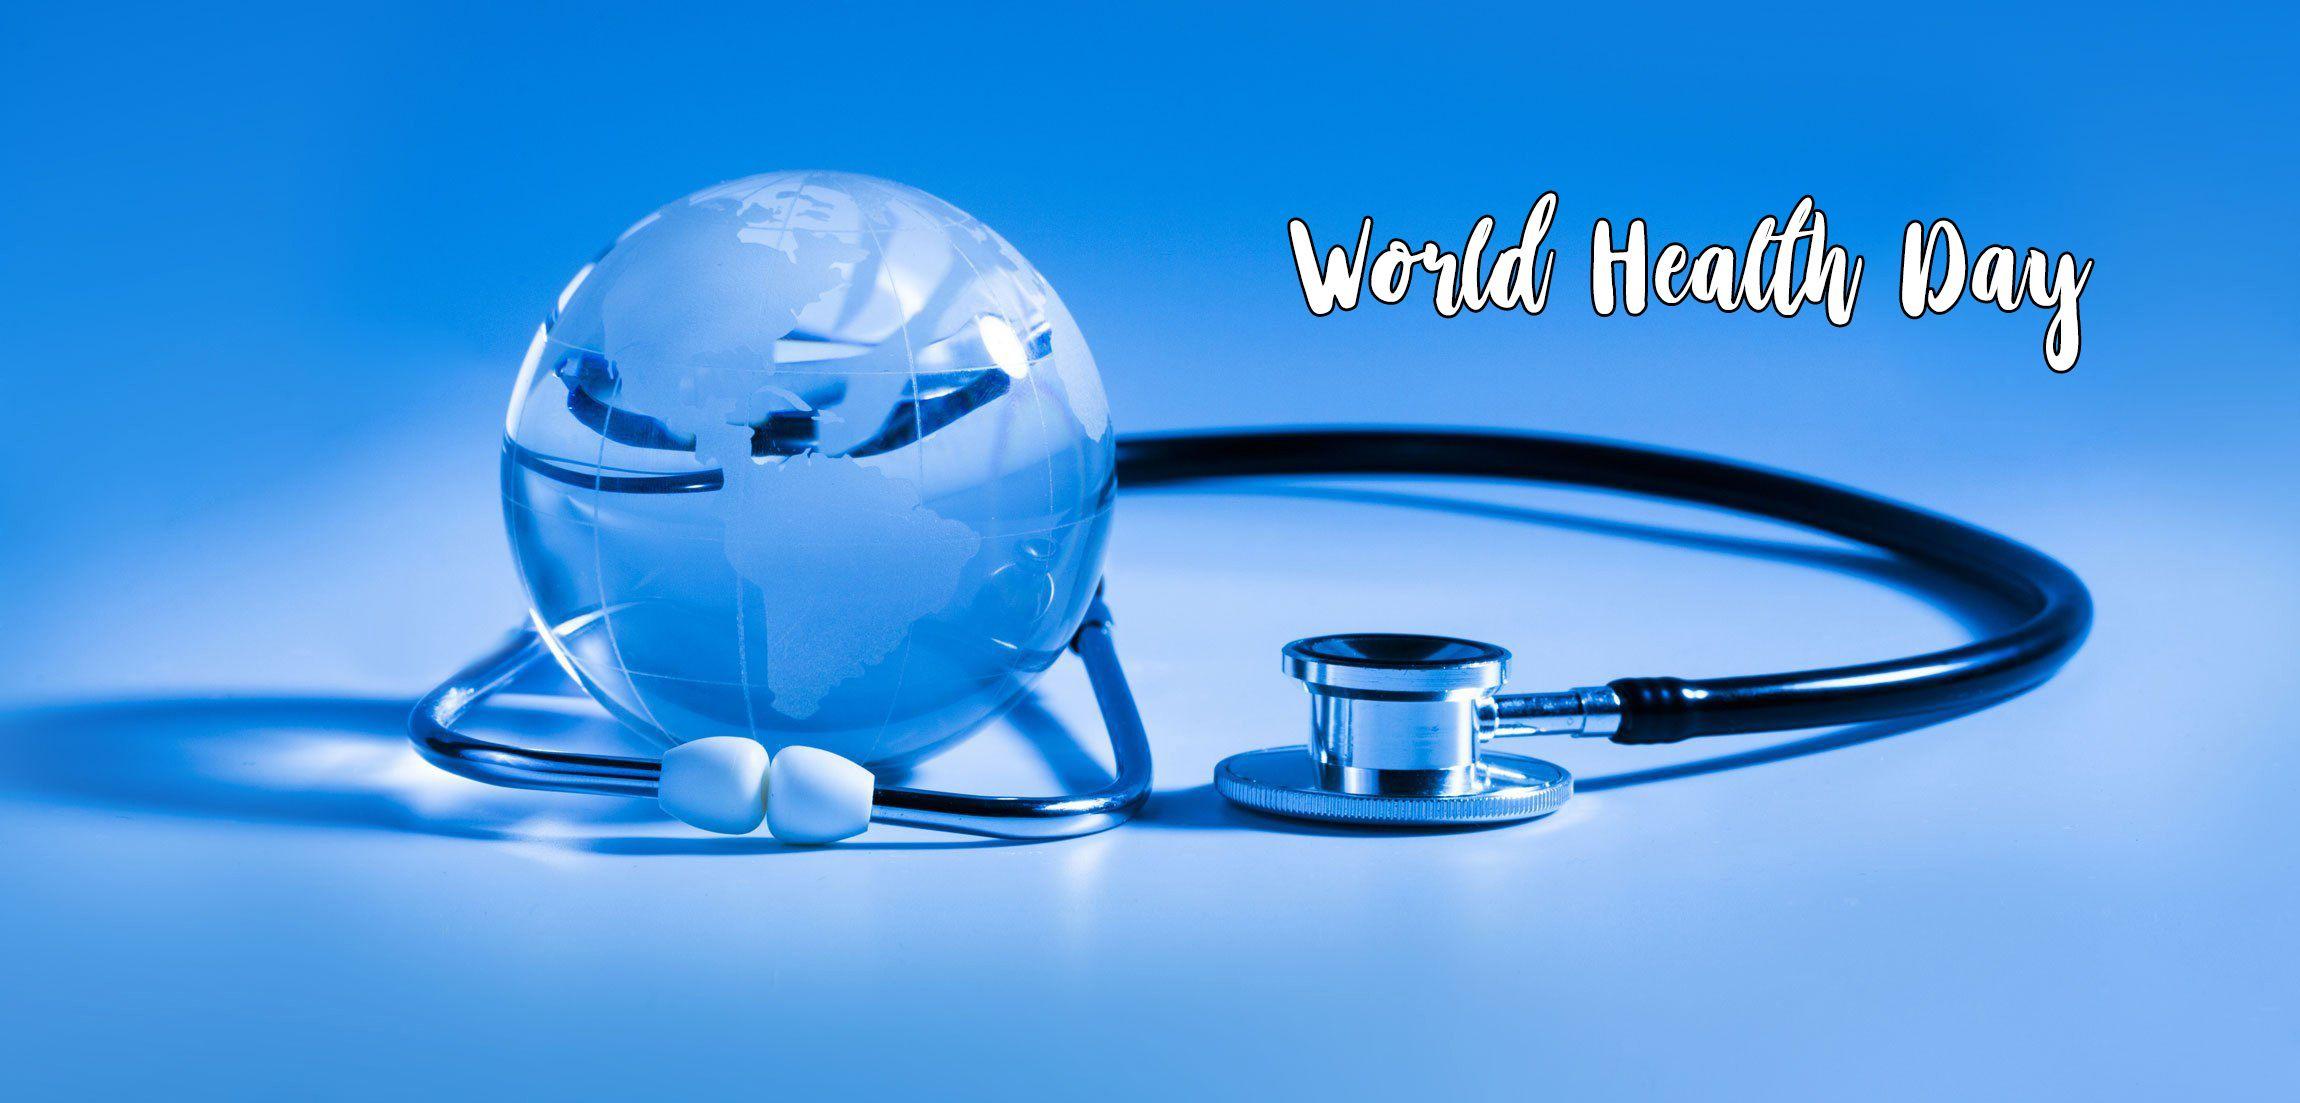 World Health Day Wallpaper Free Download